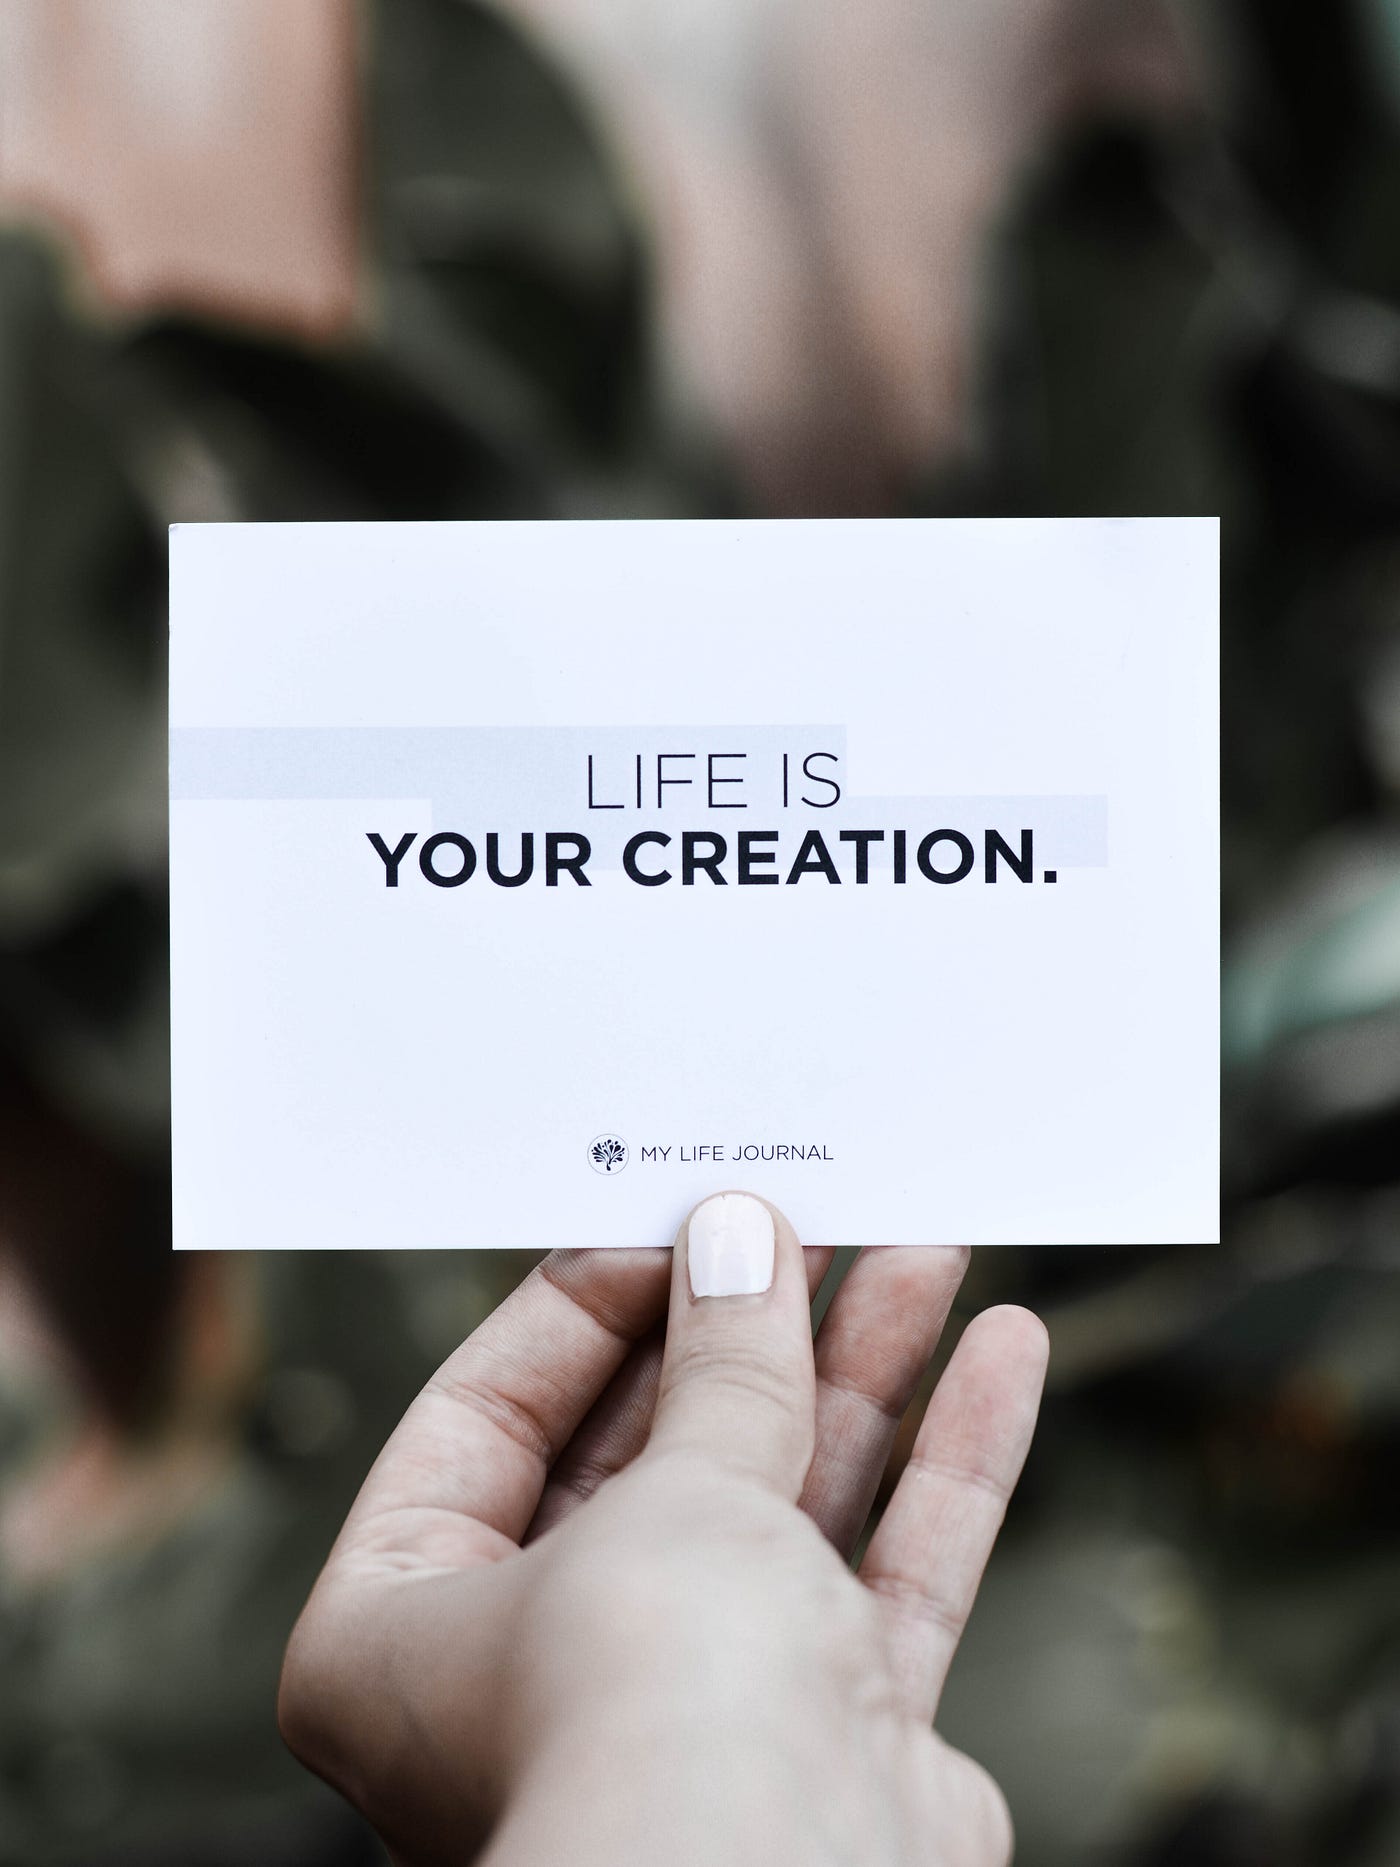 A picture of a woman’s hand holding a white card that reads: “Life is your creation.”